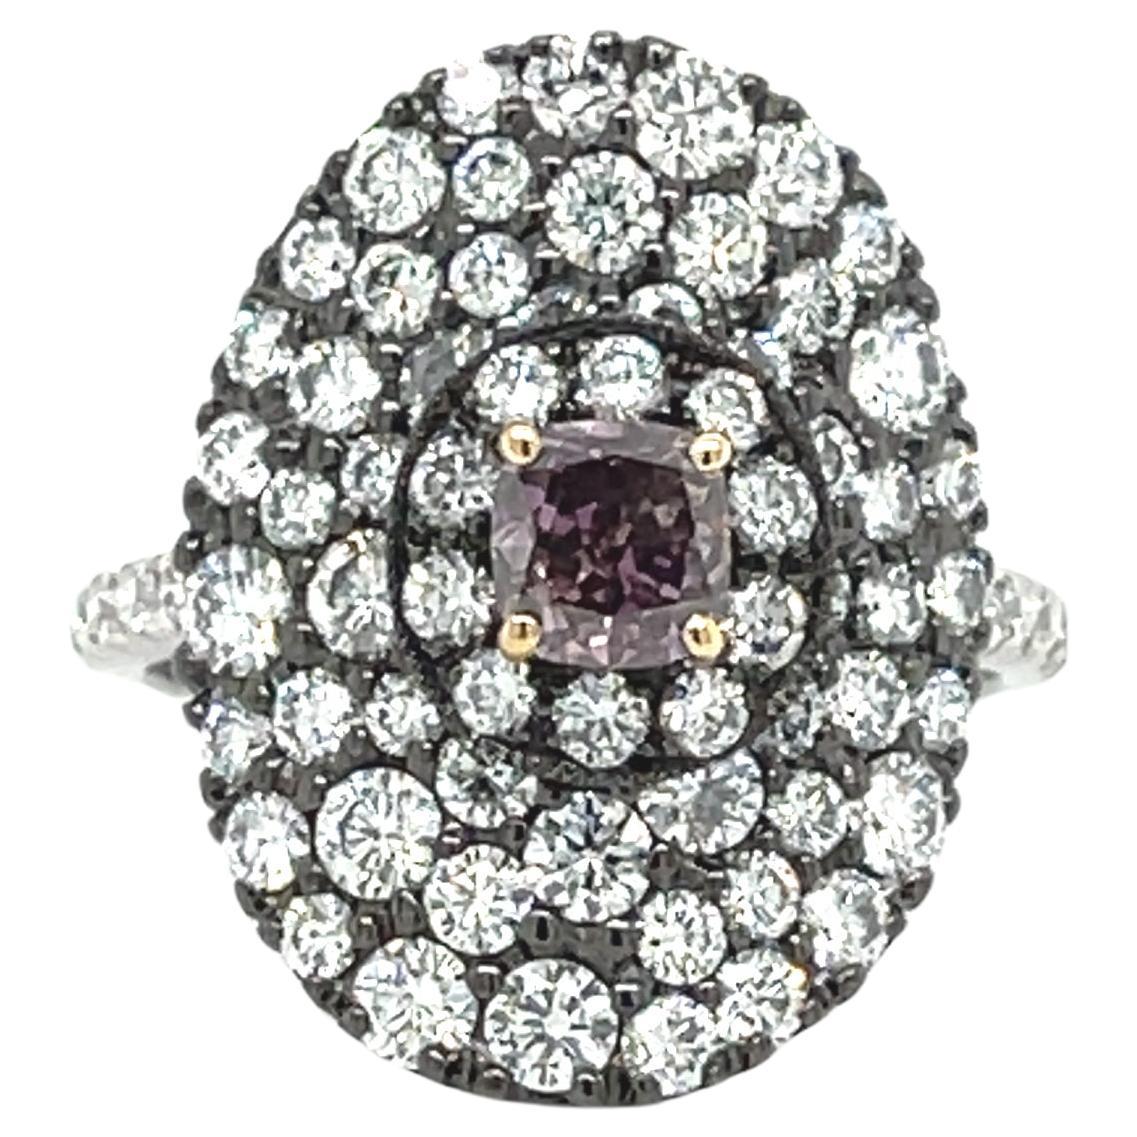 GIA Certified Purple-Pink Cushion Cut 0.50 Carat Diamond Ring in 18K Gold For Sale